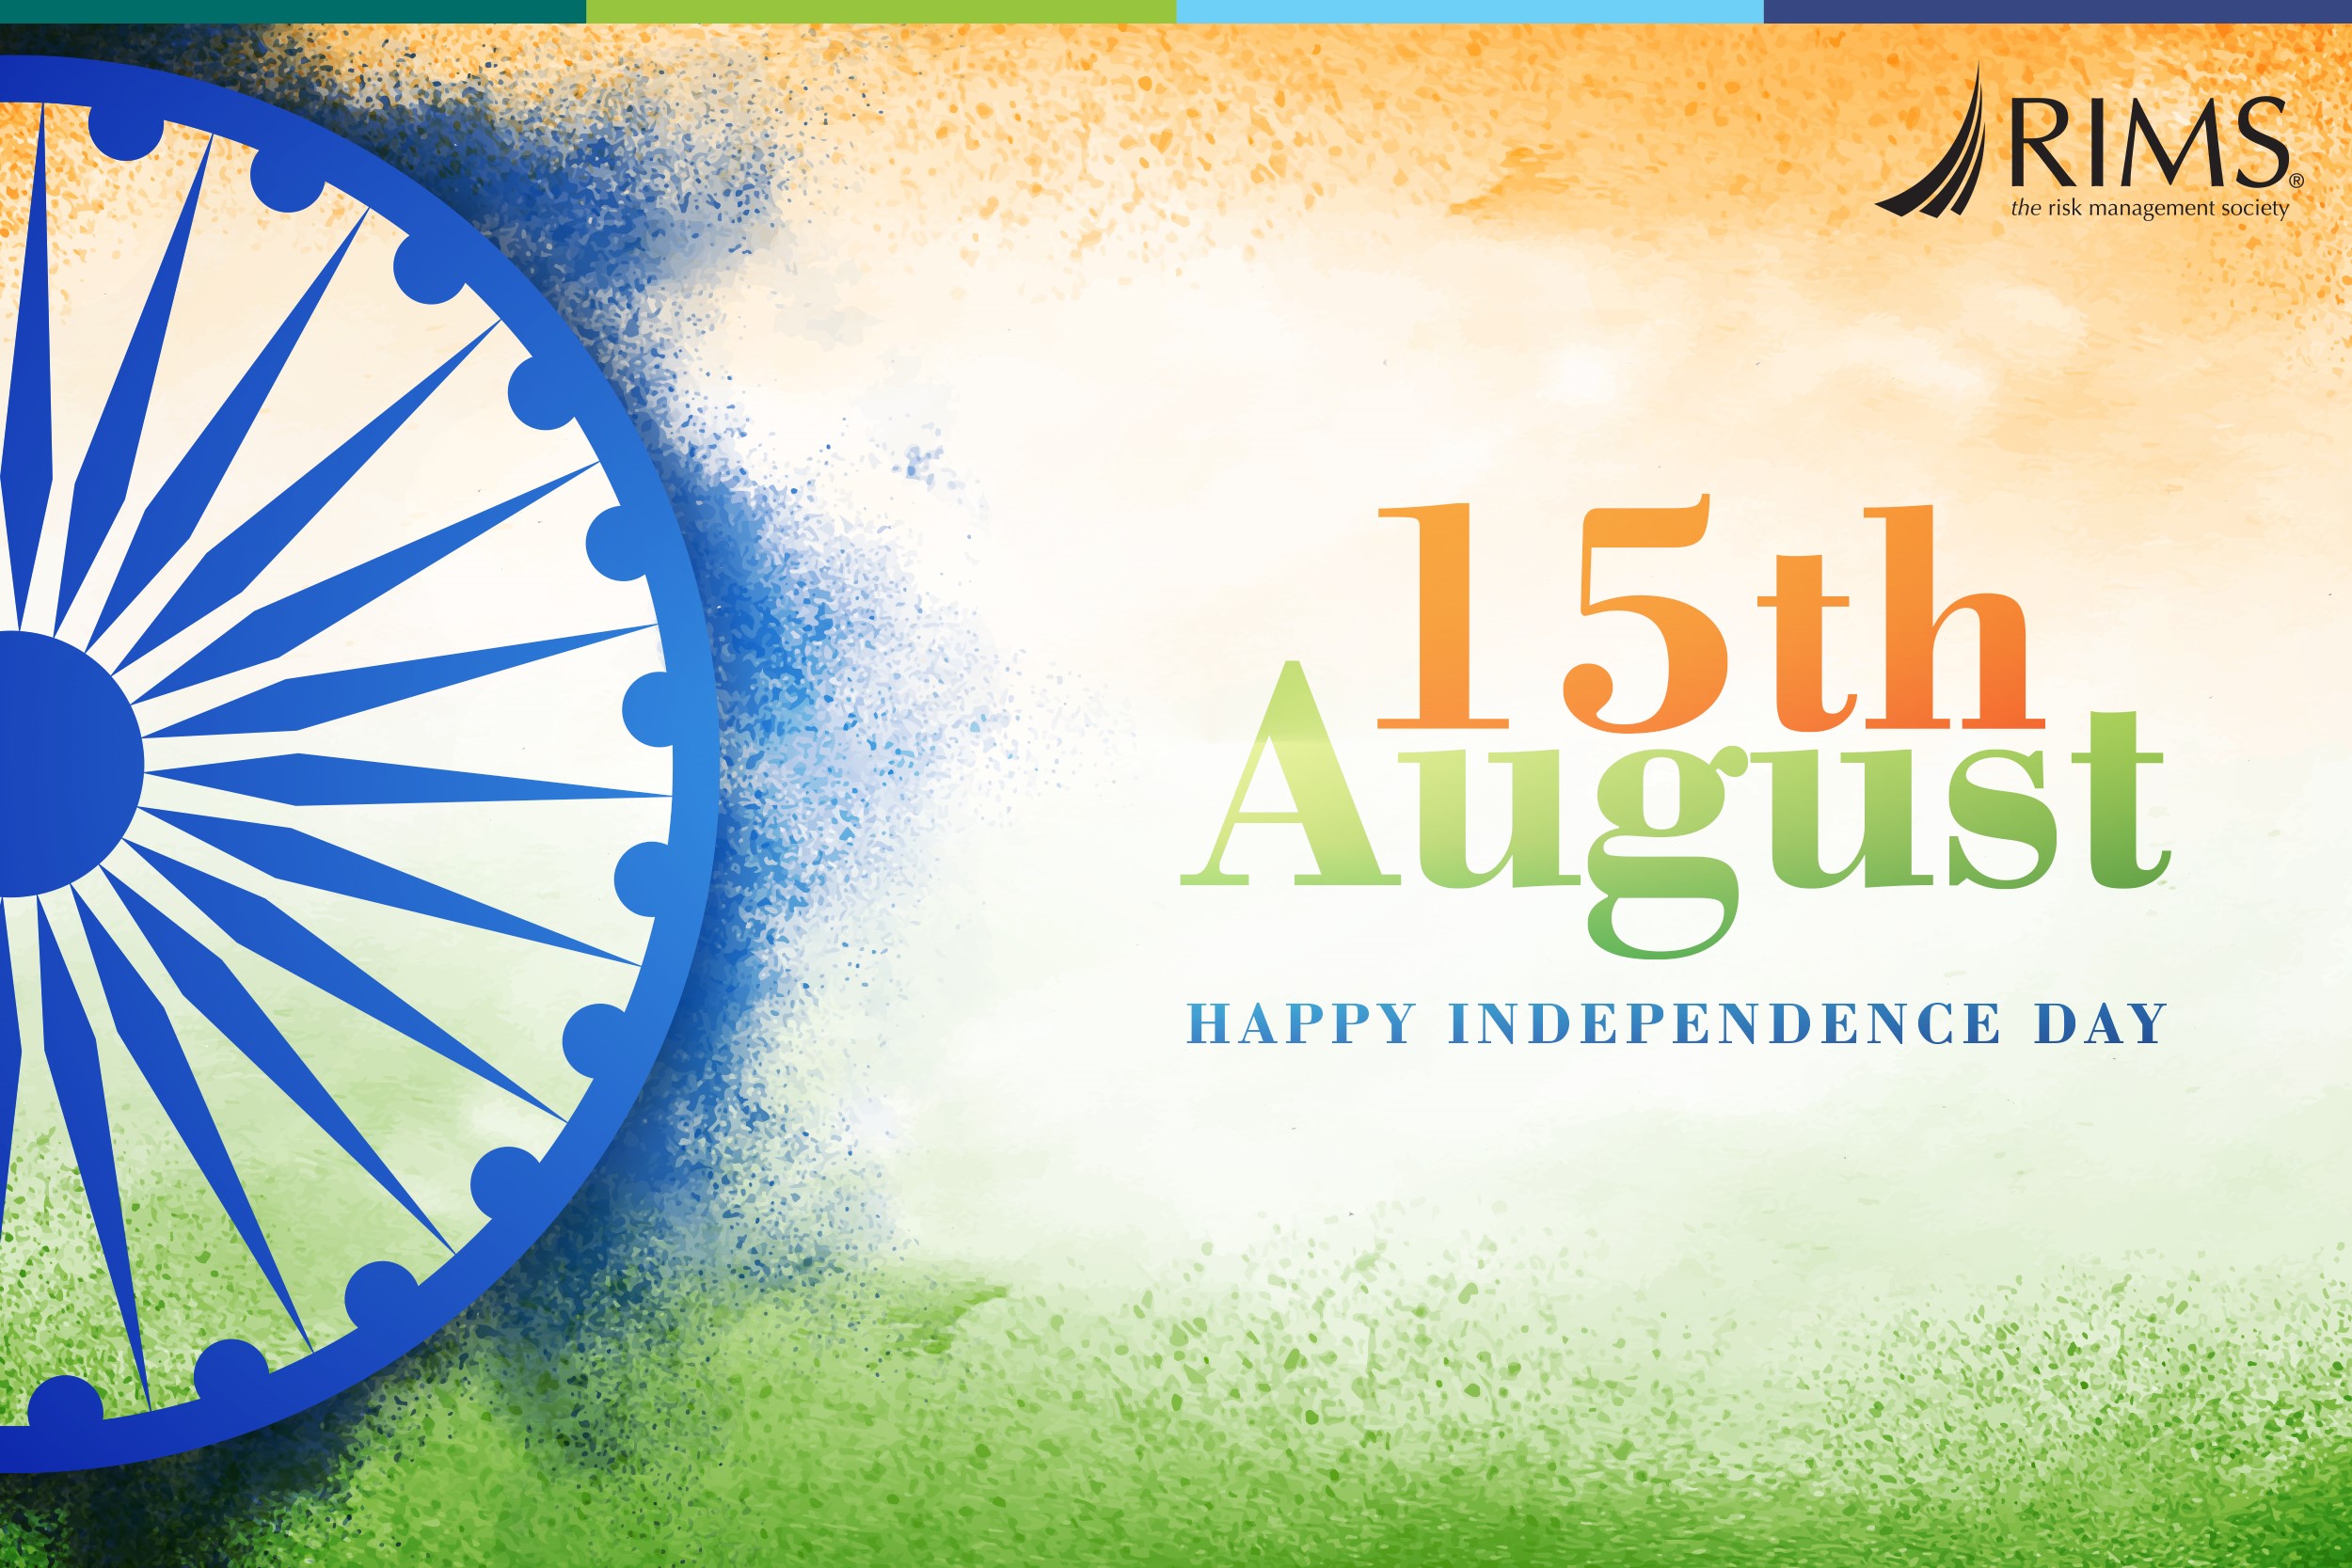 India Independence Day